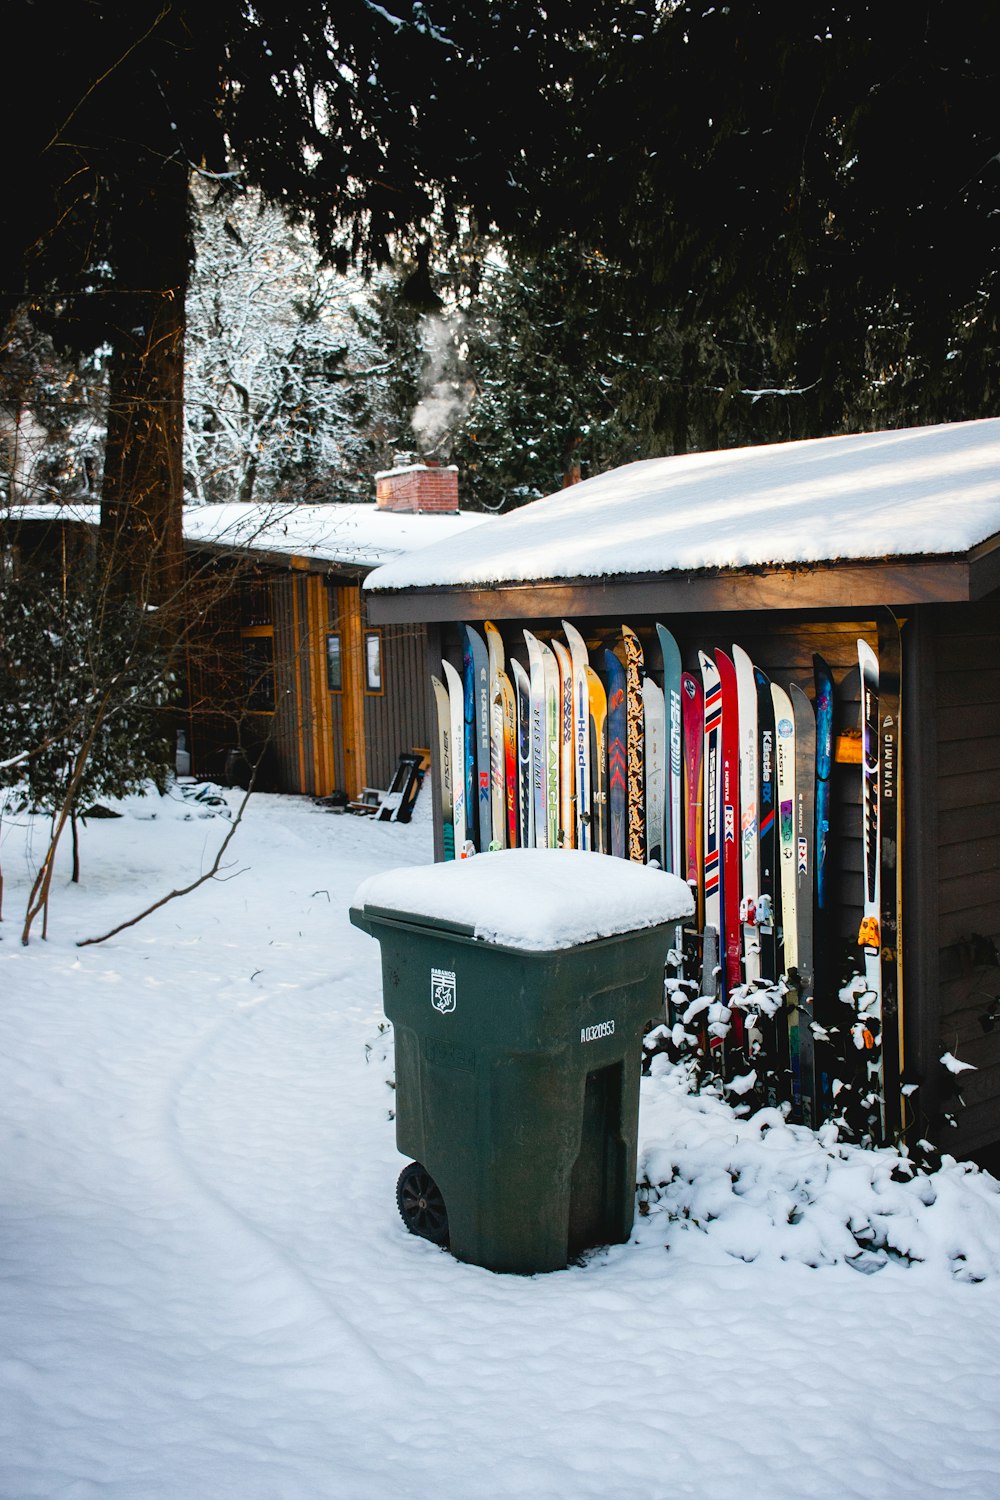 a bunch of skis that are in the snow